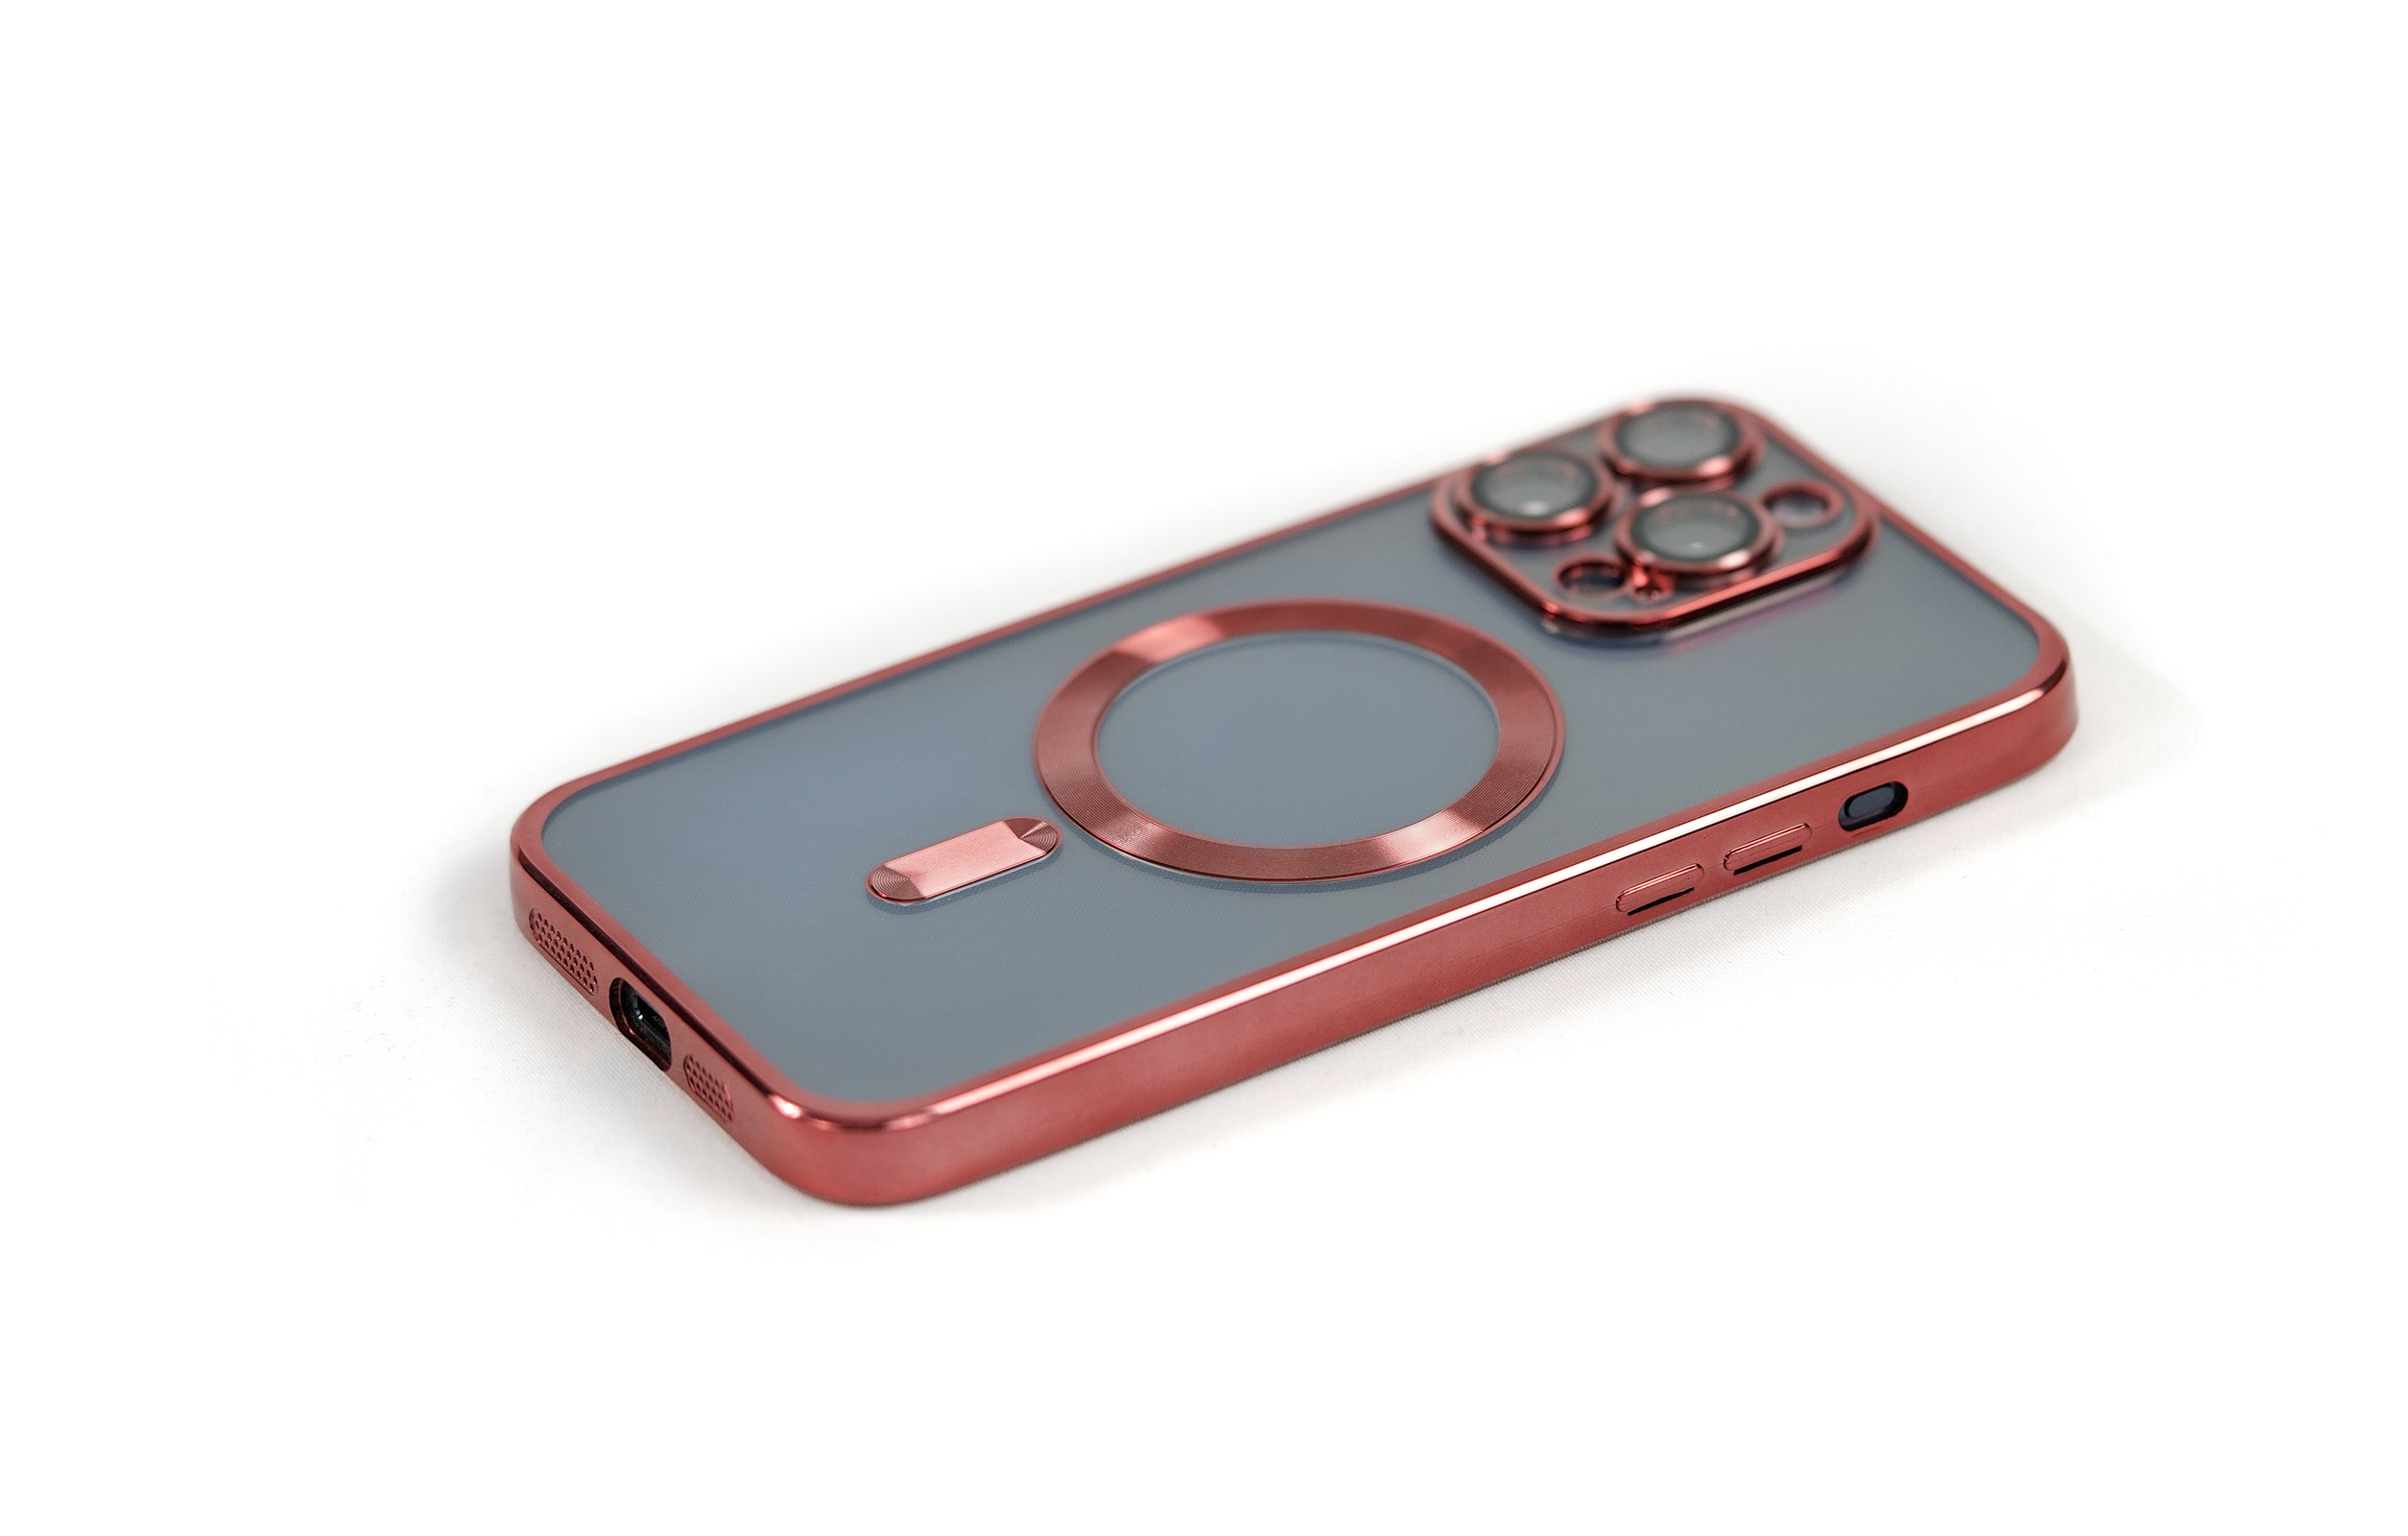 Pro Silikon MagSafe-kompatible, Apple, iPhone Max, Hülle Backcover, ARRIVLY 15 Rot